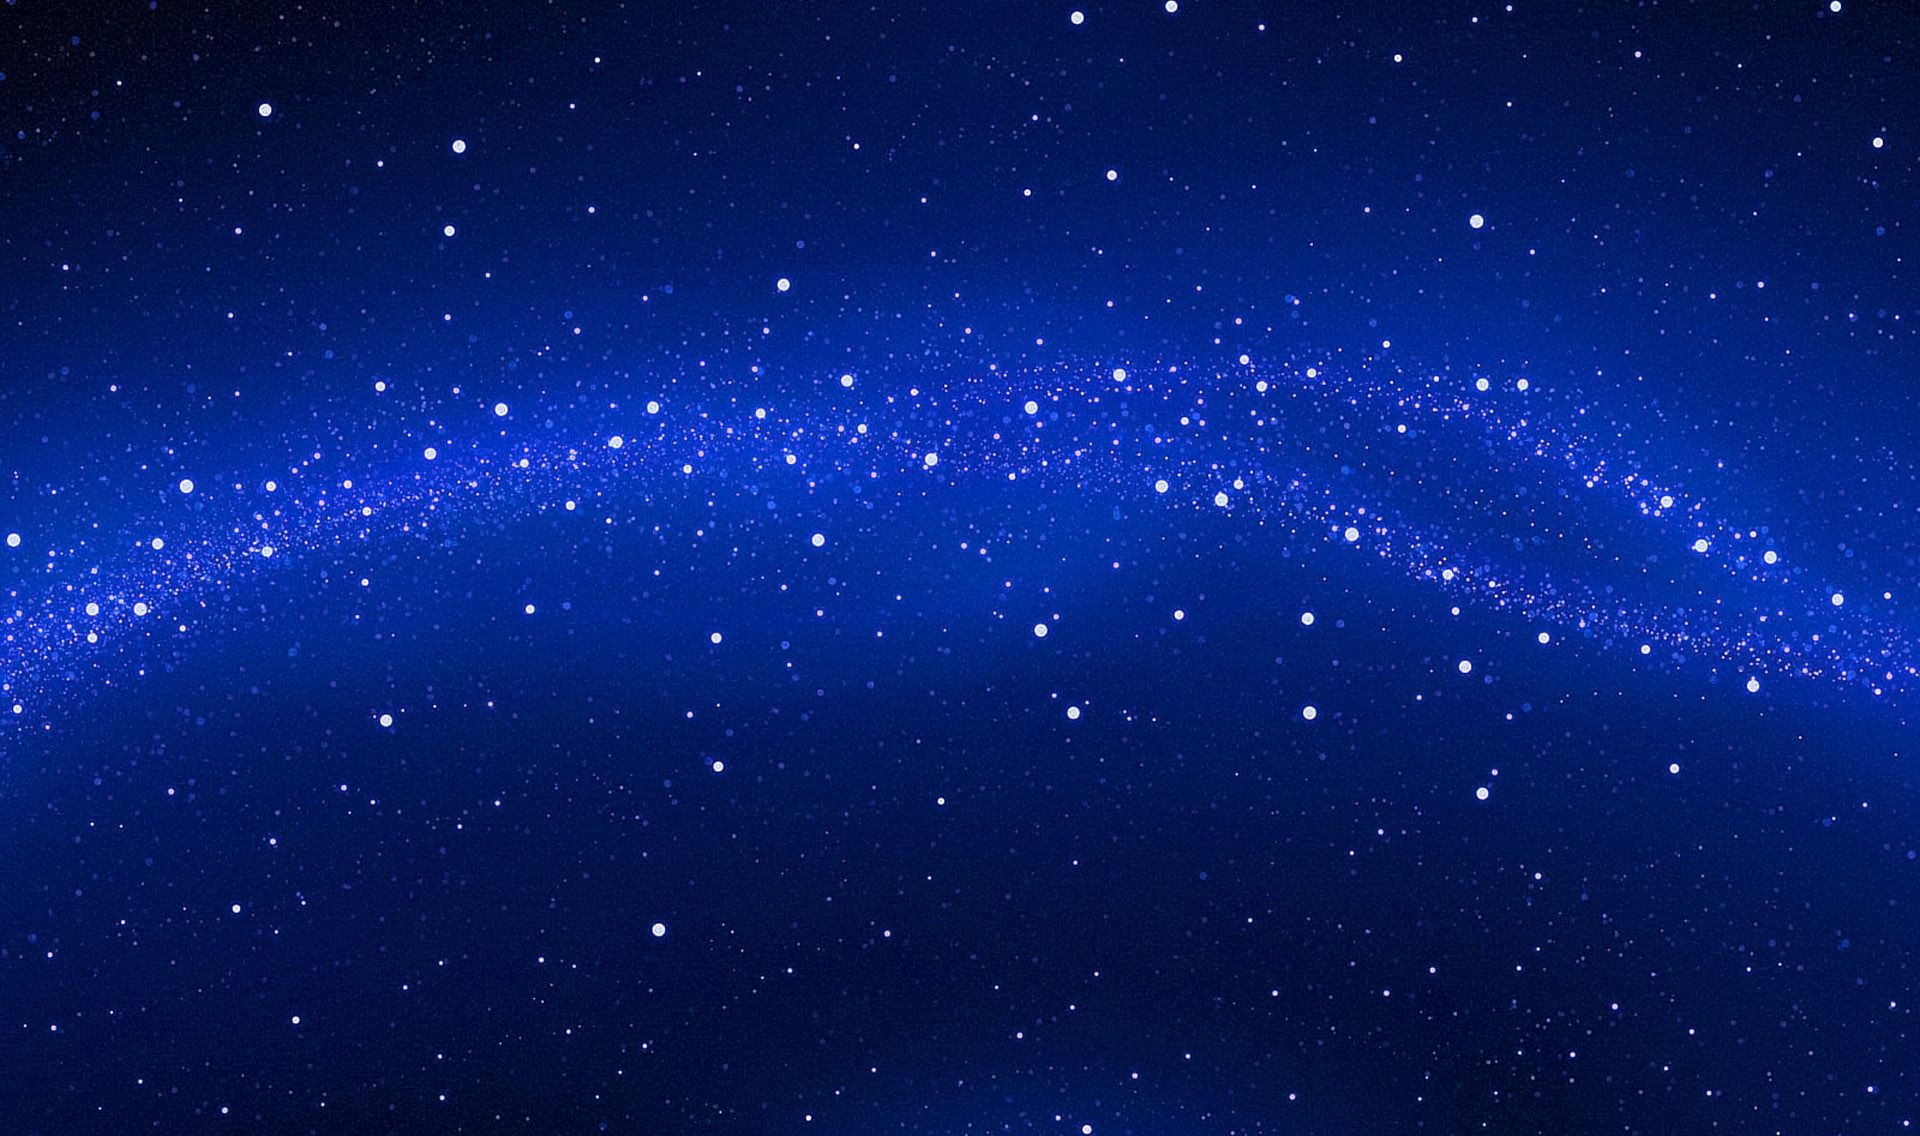 1 Night Sky HD Wallpapers | Backgrounds - Wallpaper Abyss